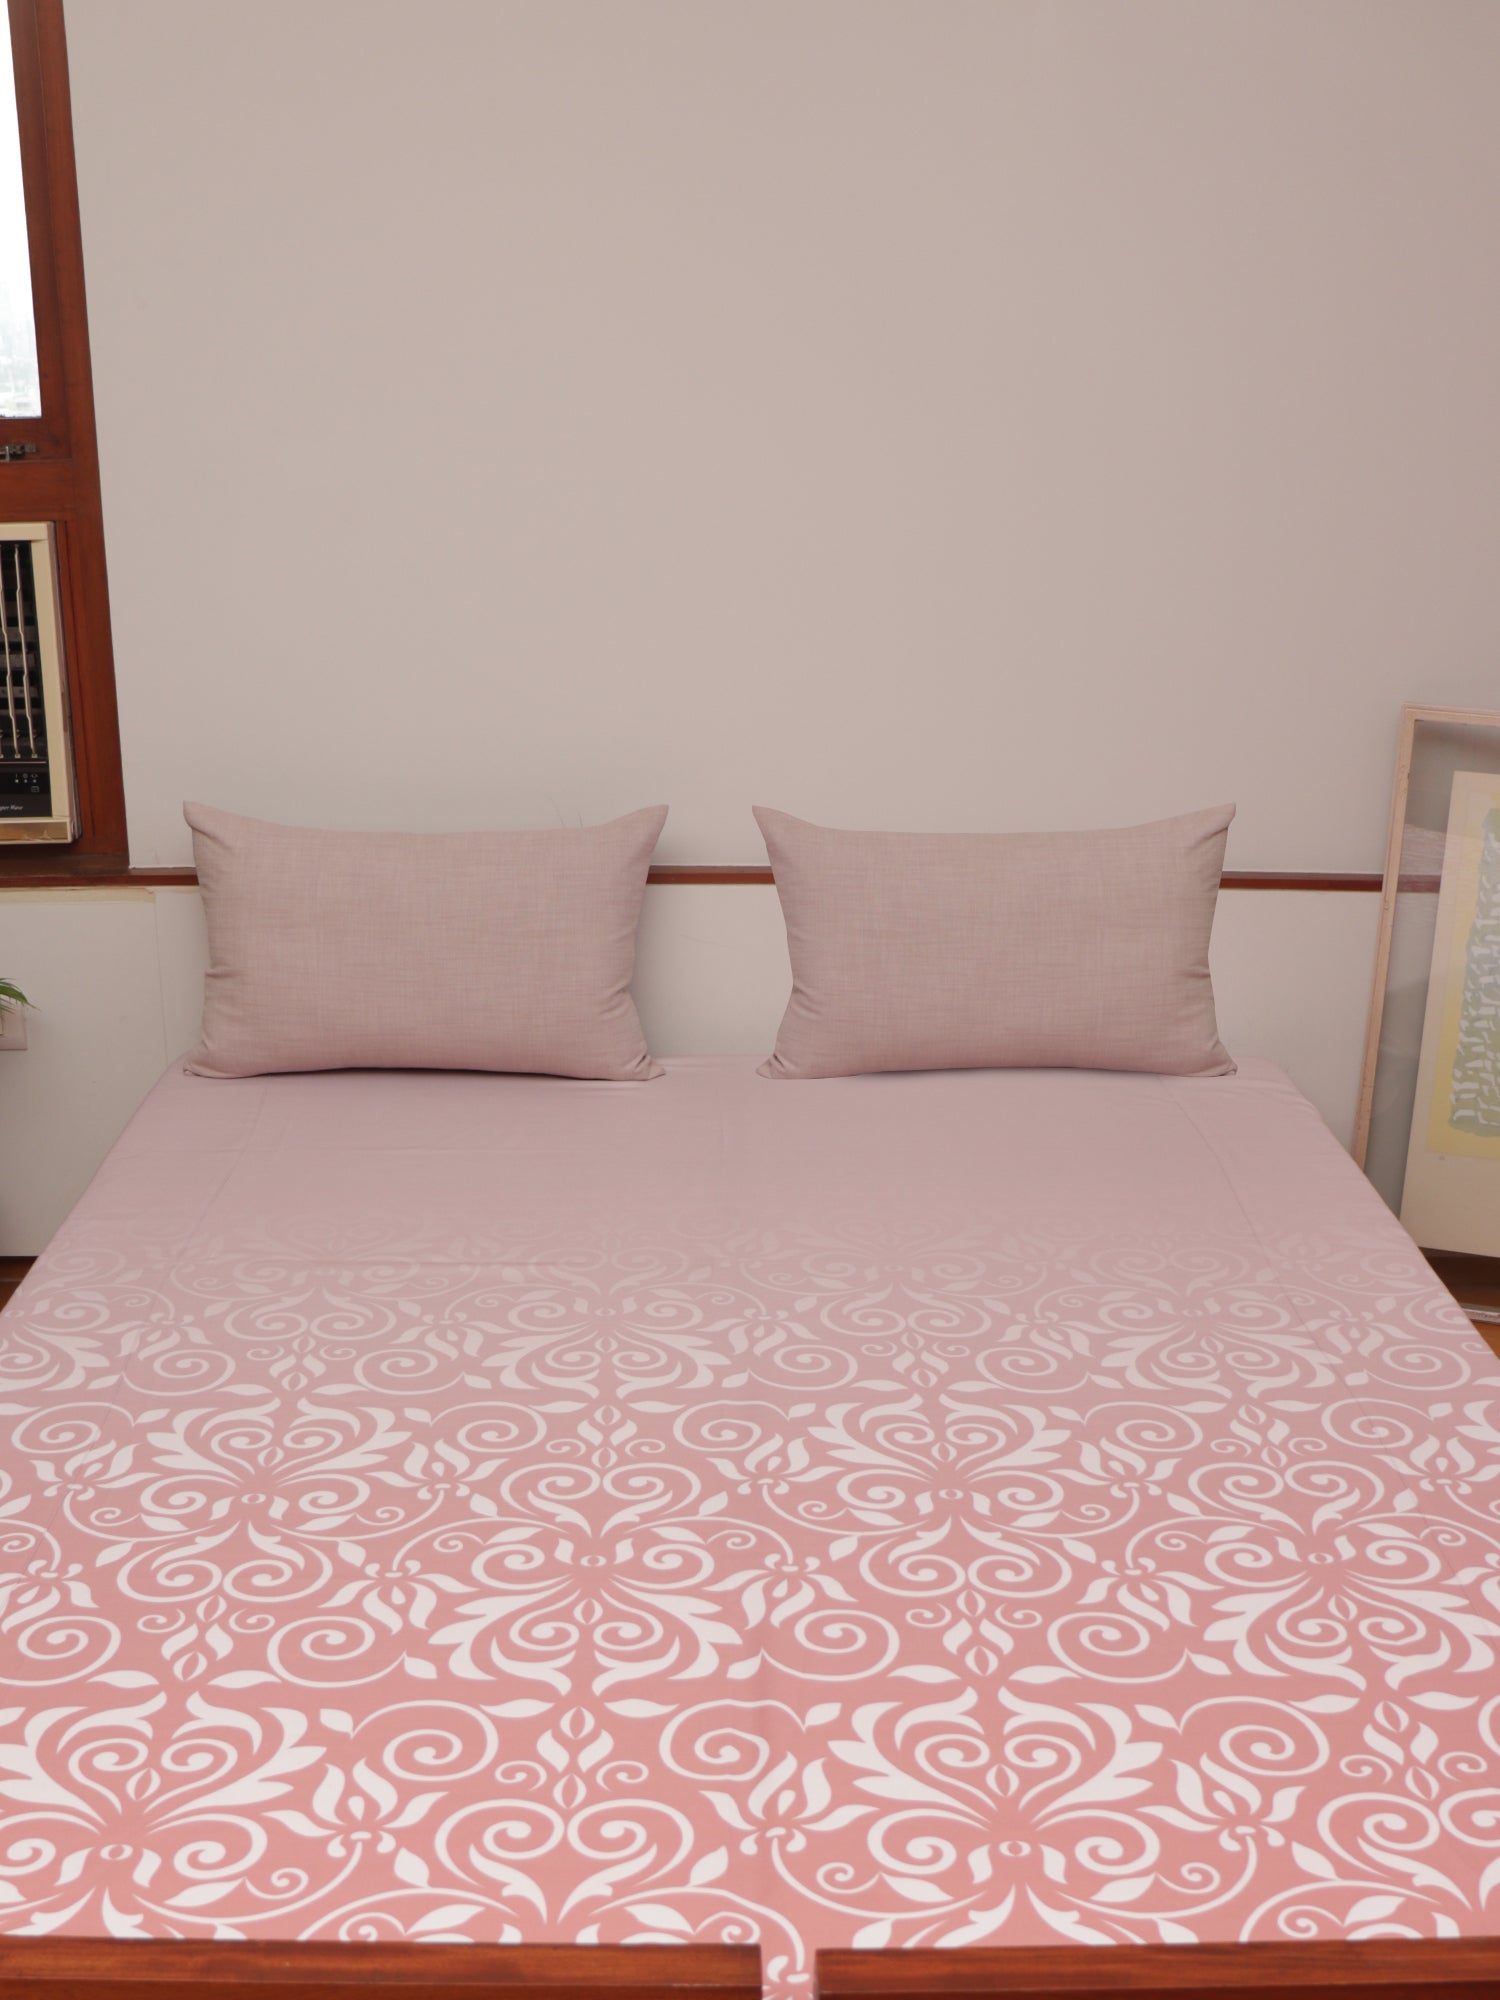 Printed Bedcover for Double Bed with 2 Pillow Covers | Queen Size - Coral Pink | Bedcover 90 x 108inches (7.5x9ft), Pillow Covers 17x27in